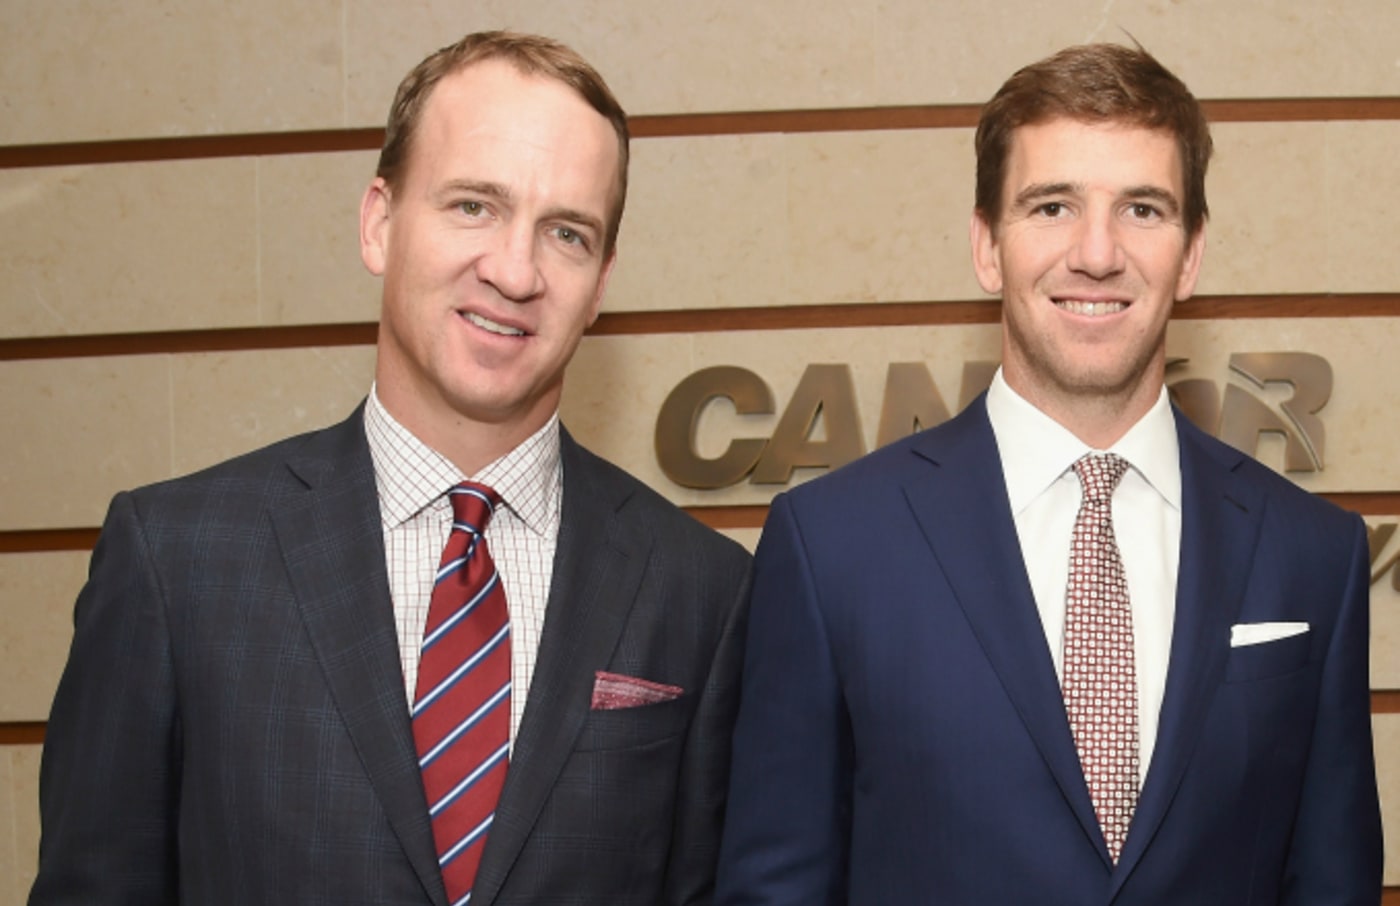 Eli Manning May Have Affected Peyton’s Decision to Stay Away From NFL